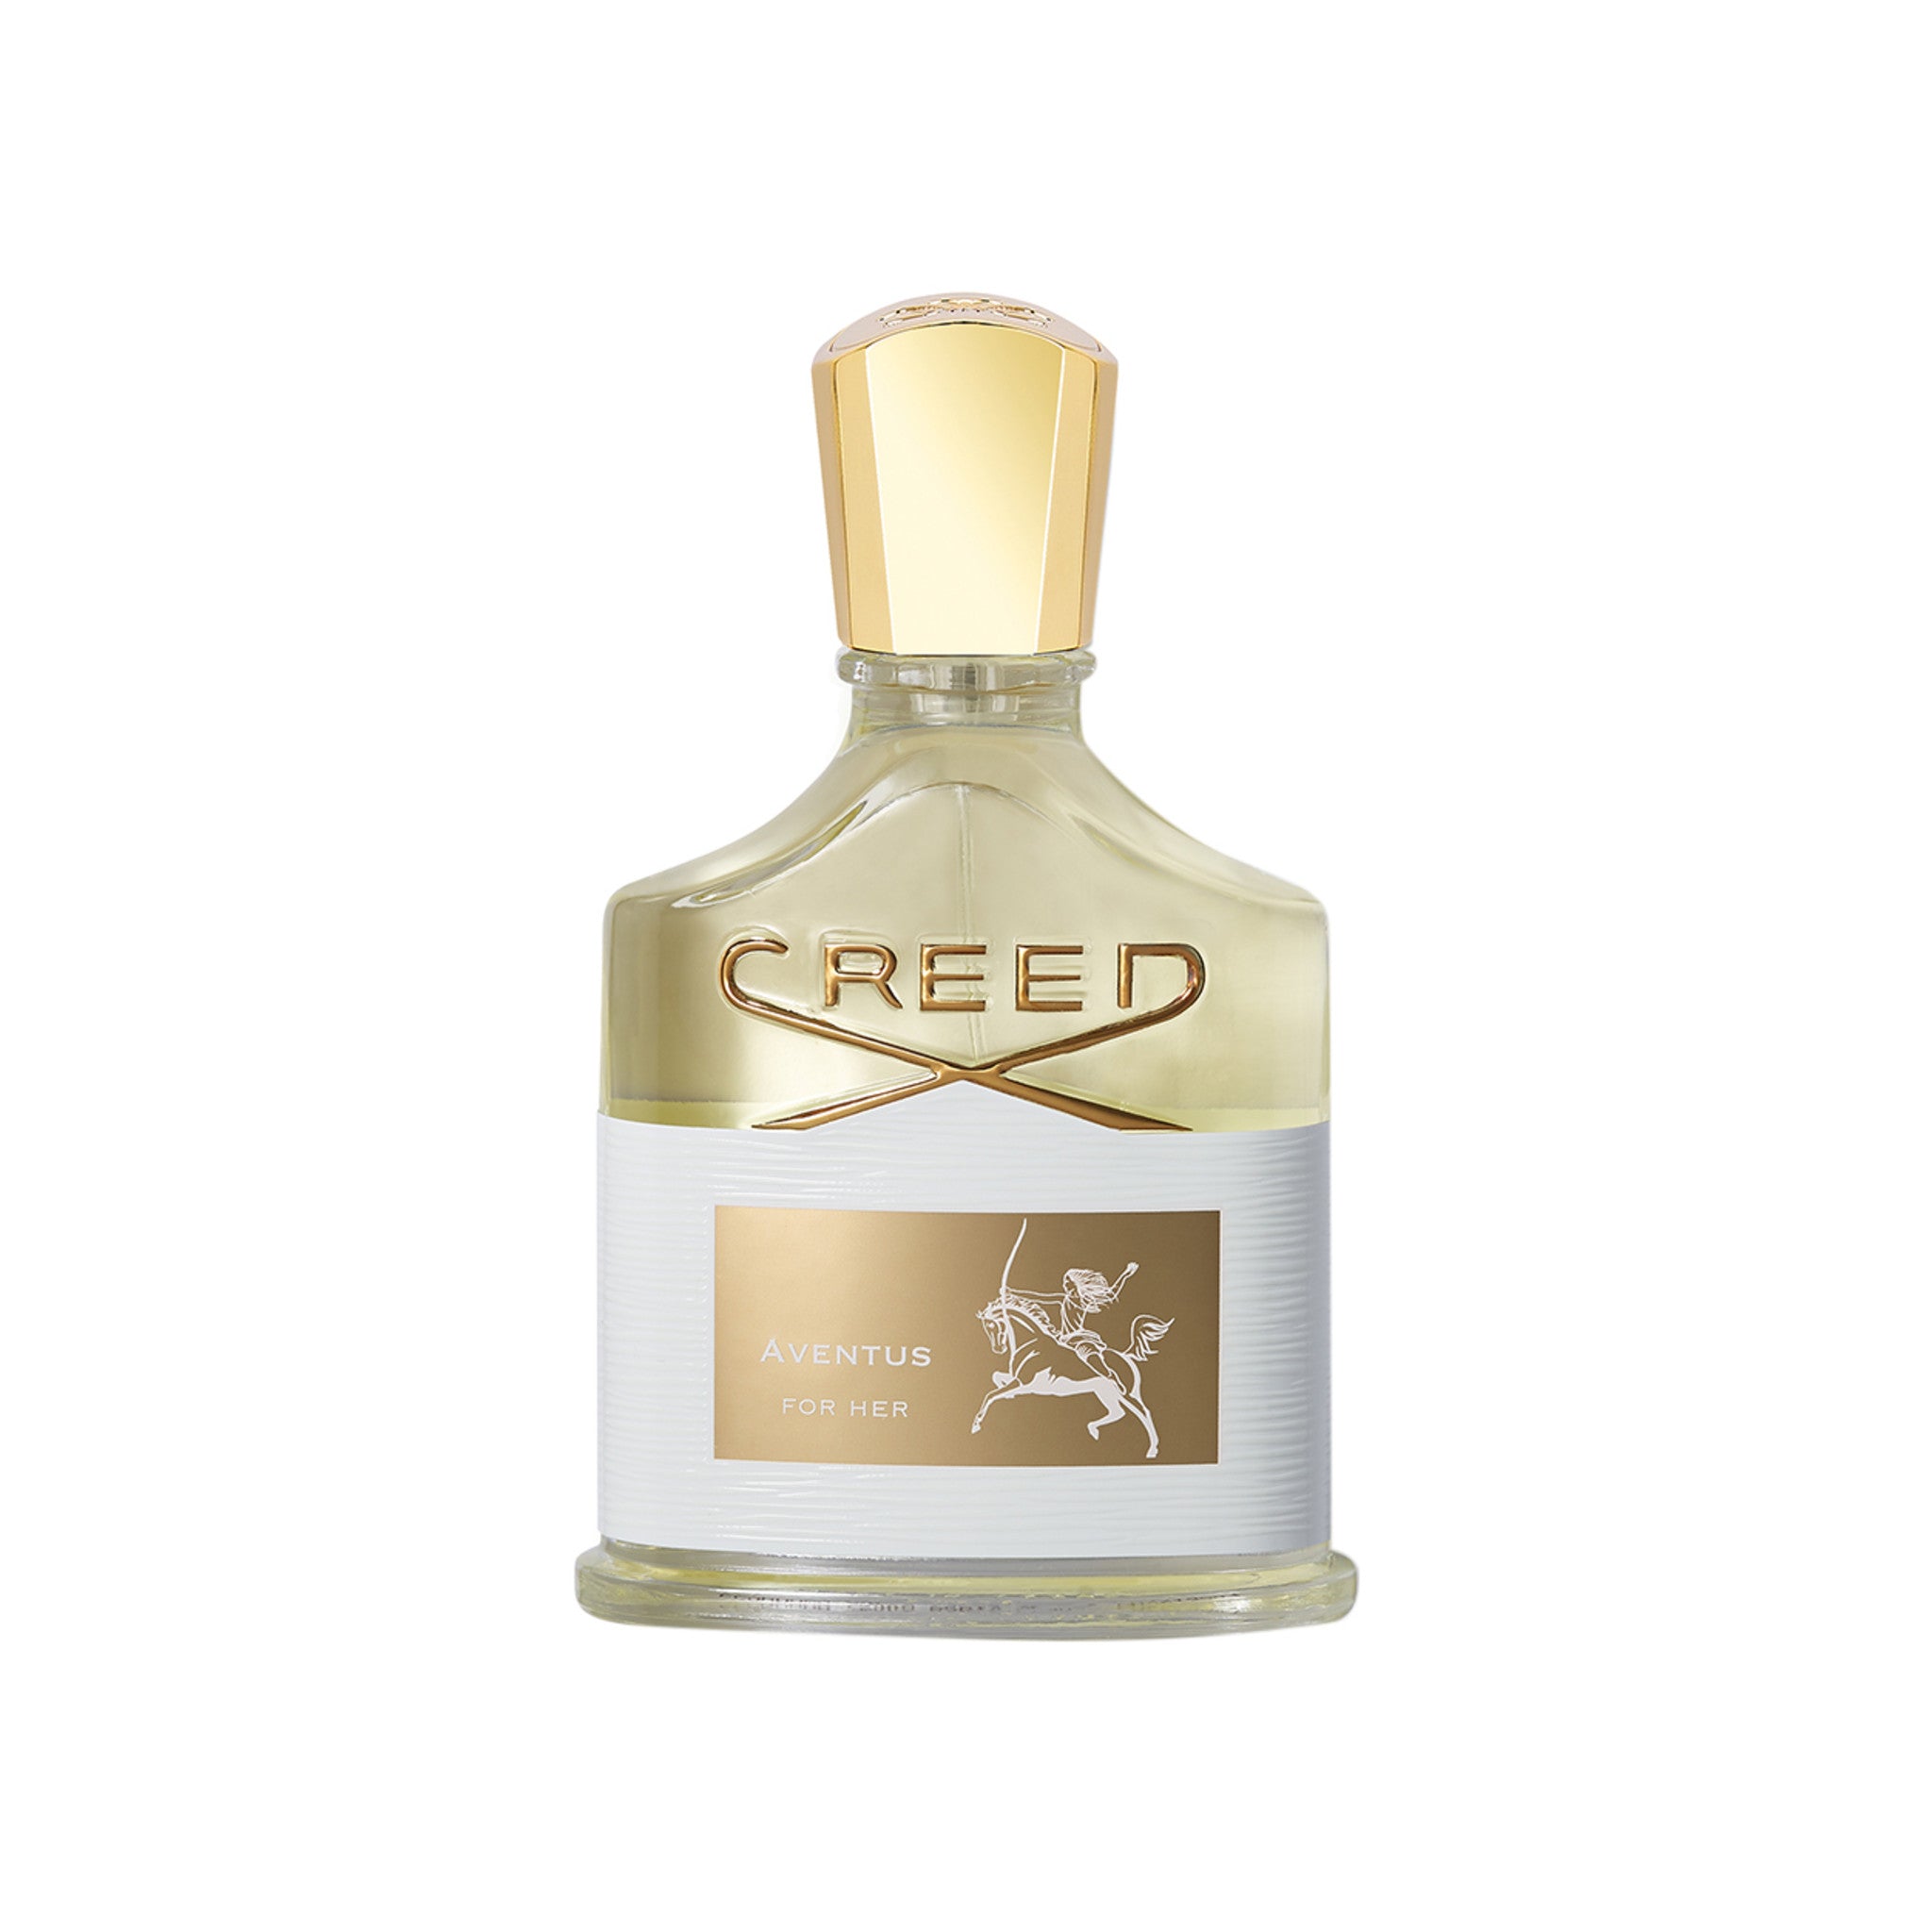 Creed Aventus For Her Size variant: 2.53 fl oz main image.